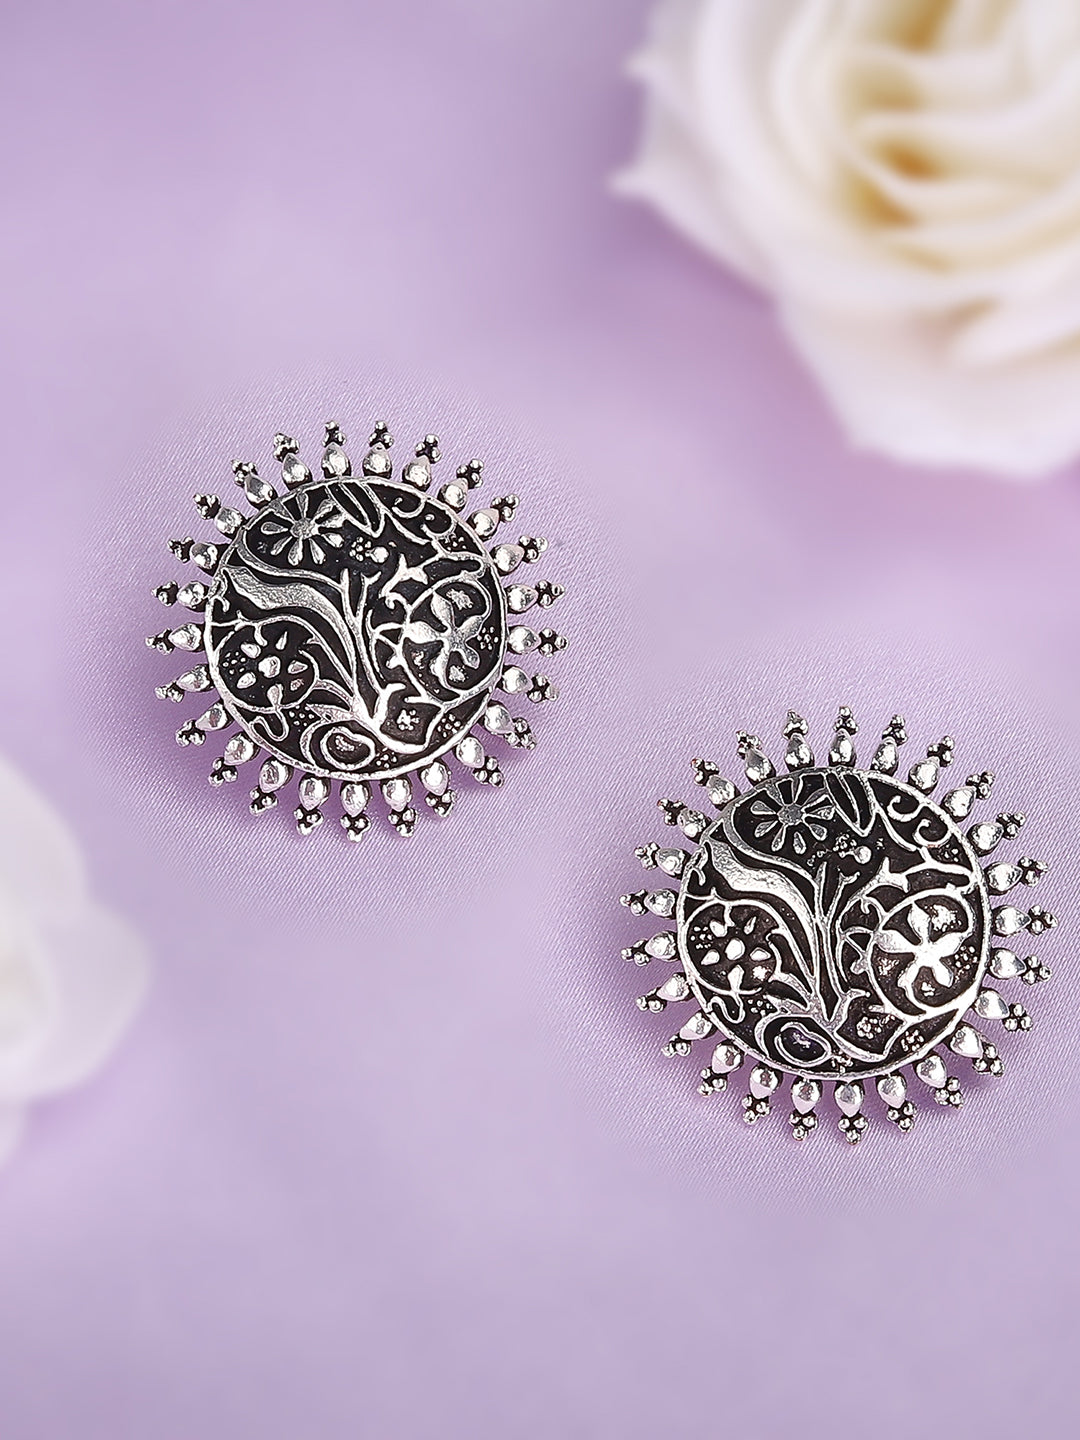 Oxidized Earrings with Floral Design